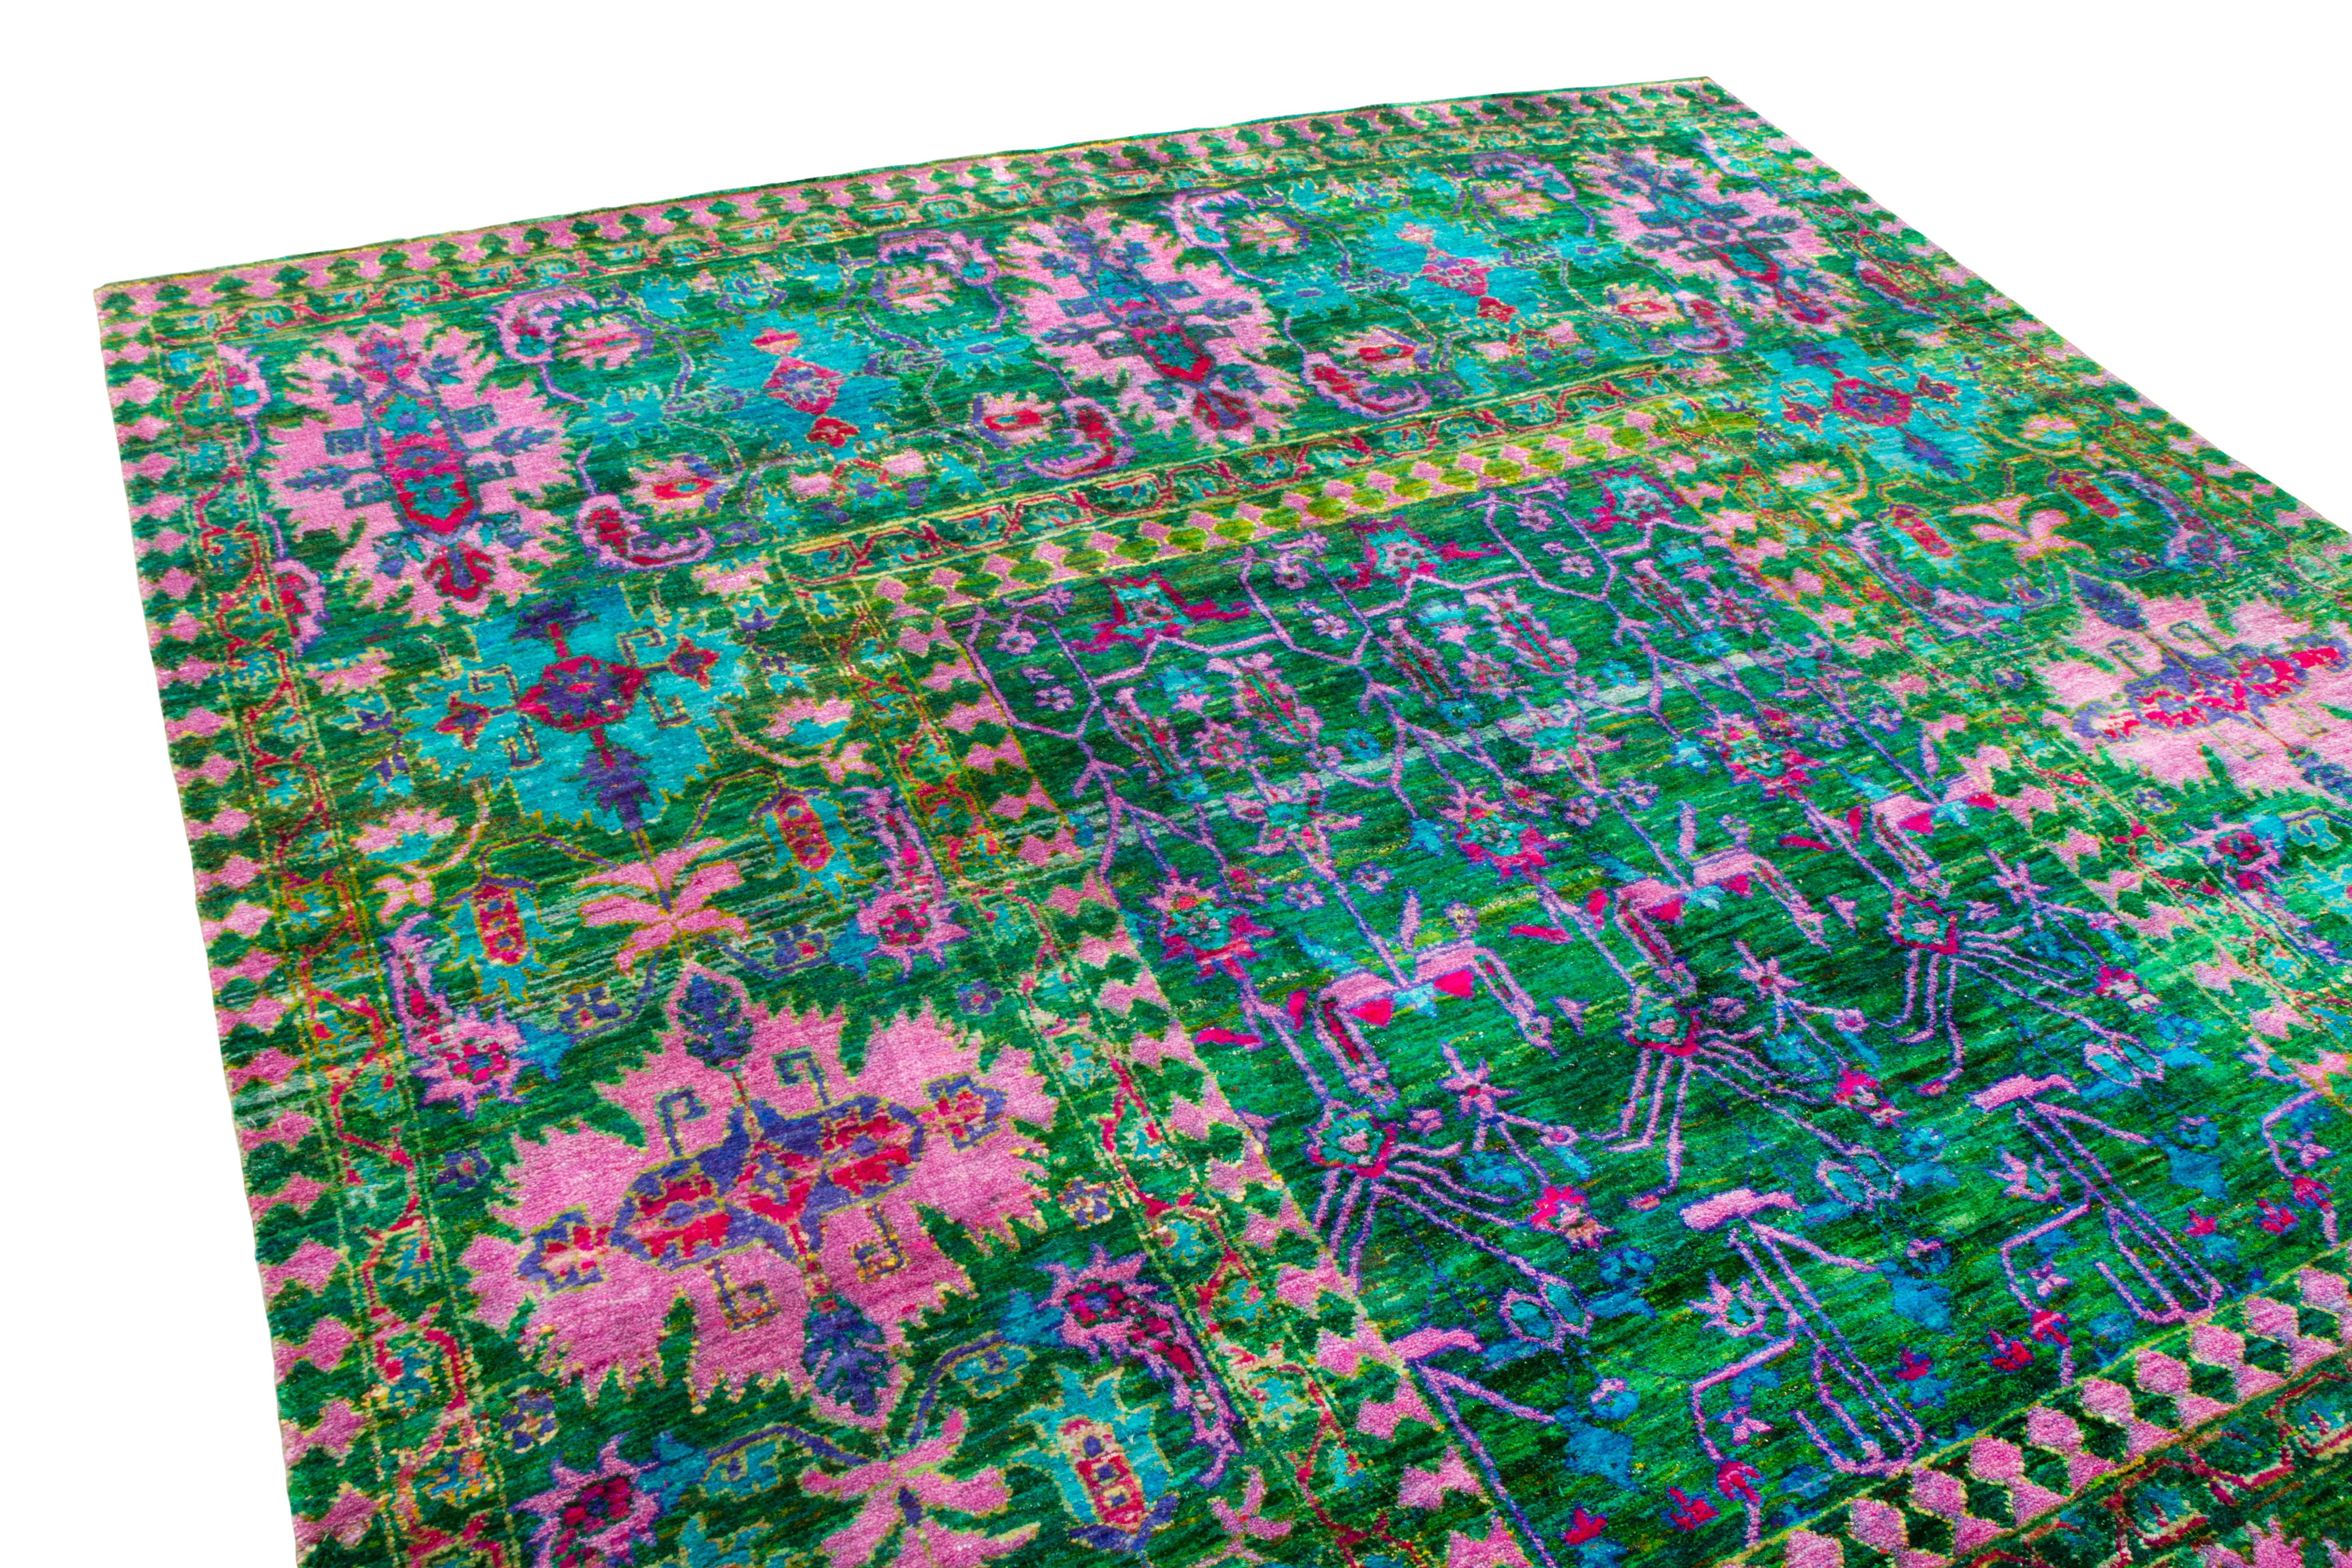 An 8x10 ode to classic rug styles in hand-knotted sari silk, from Rug & Kilim’s Modern Classics Collection. A rare, rich area rug our team has come to associate with a regal, very queenly presence. 

Further on the design: The greens, pinks, reds,